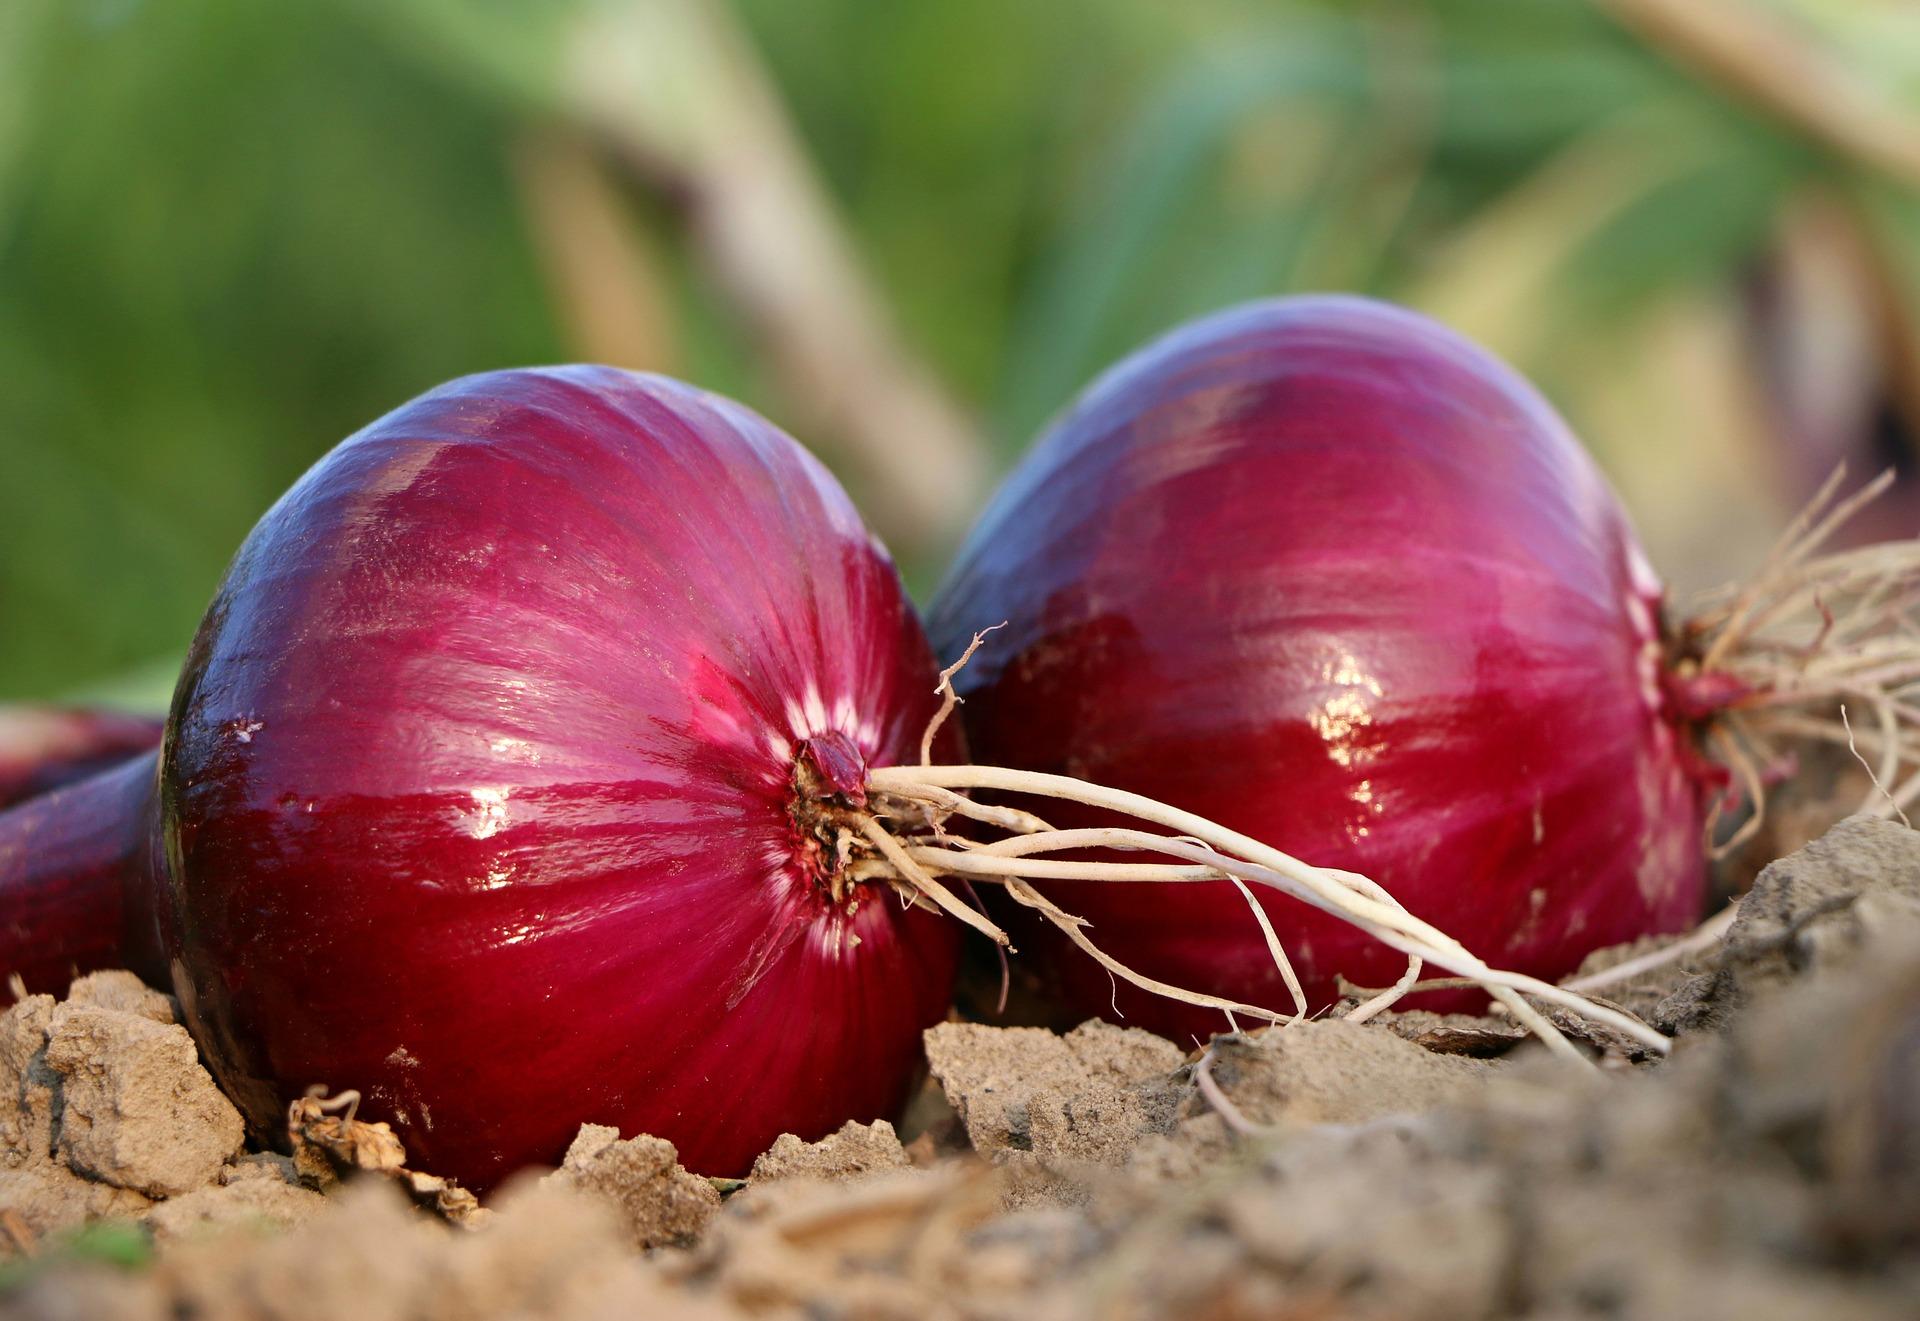 Onions 'Karmen Red' - Onions (Shipping begins Mar. 2021) from Leo Berbee Bulb Company